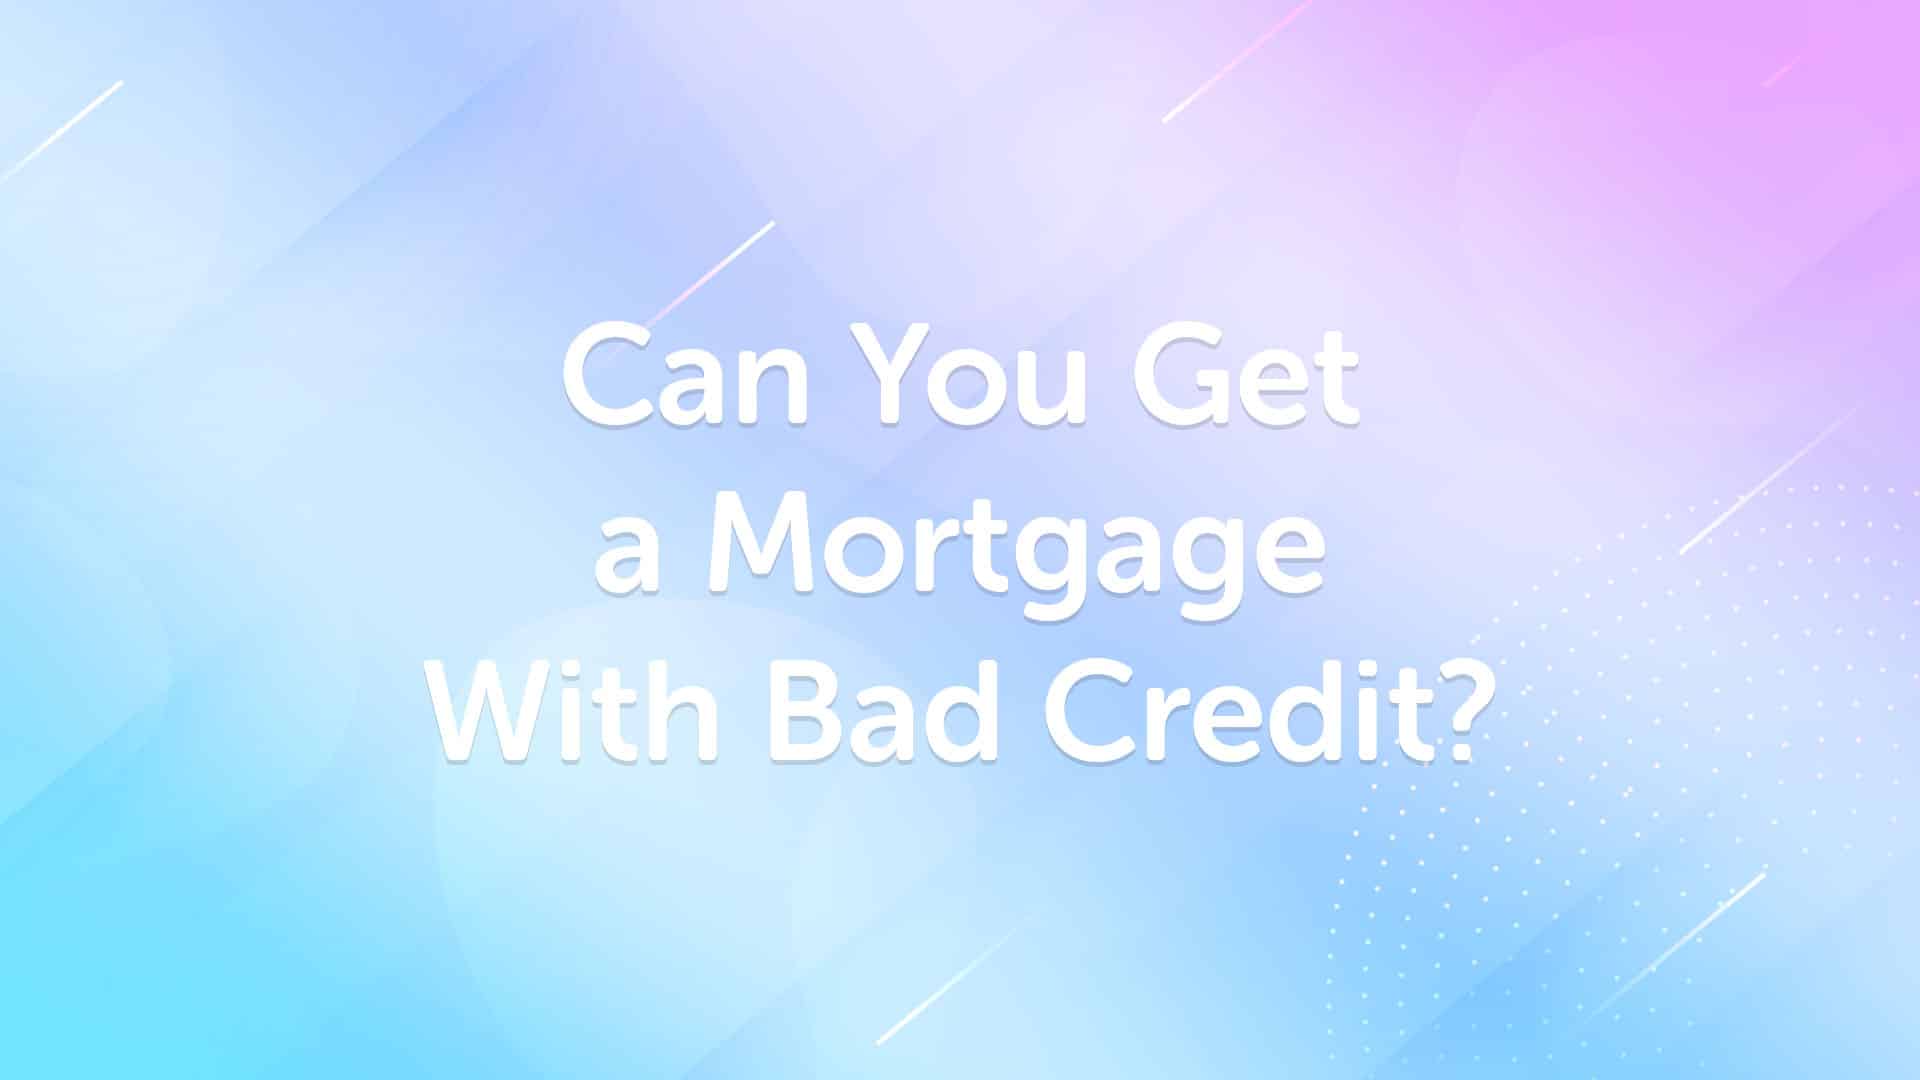 Mortgage With Bad Credit in Cardiff